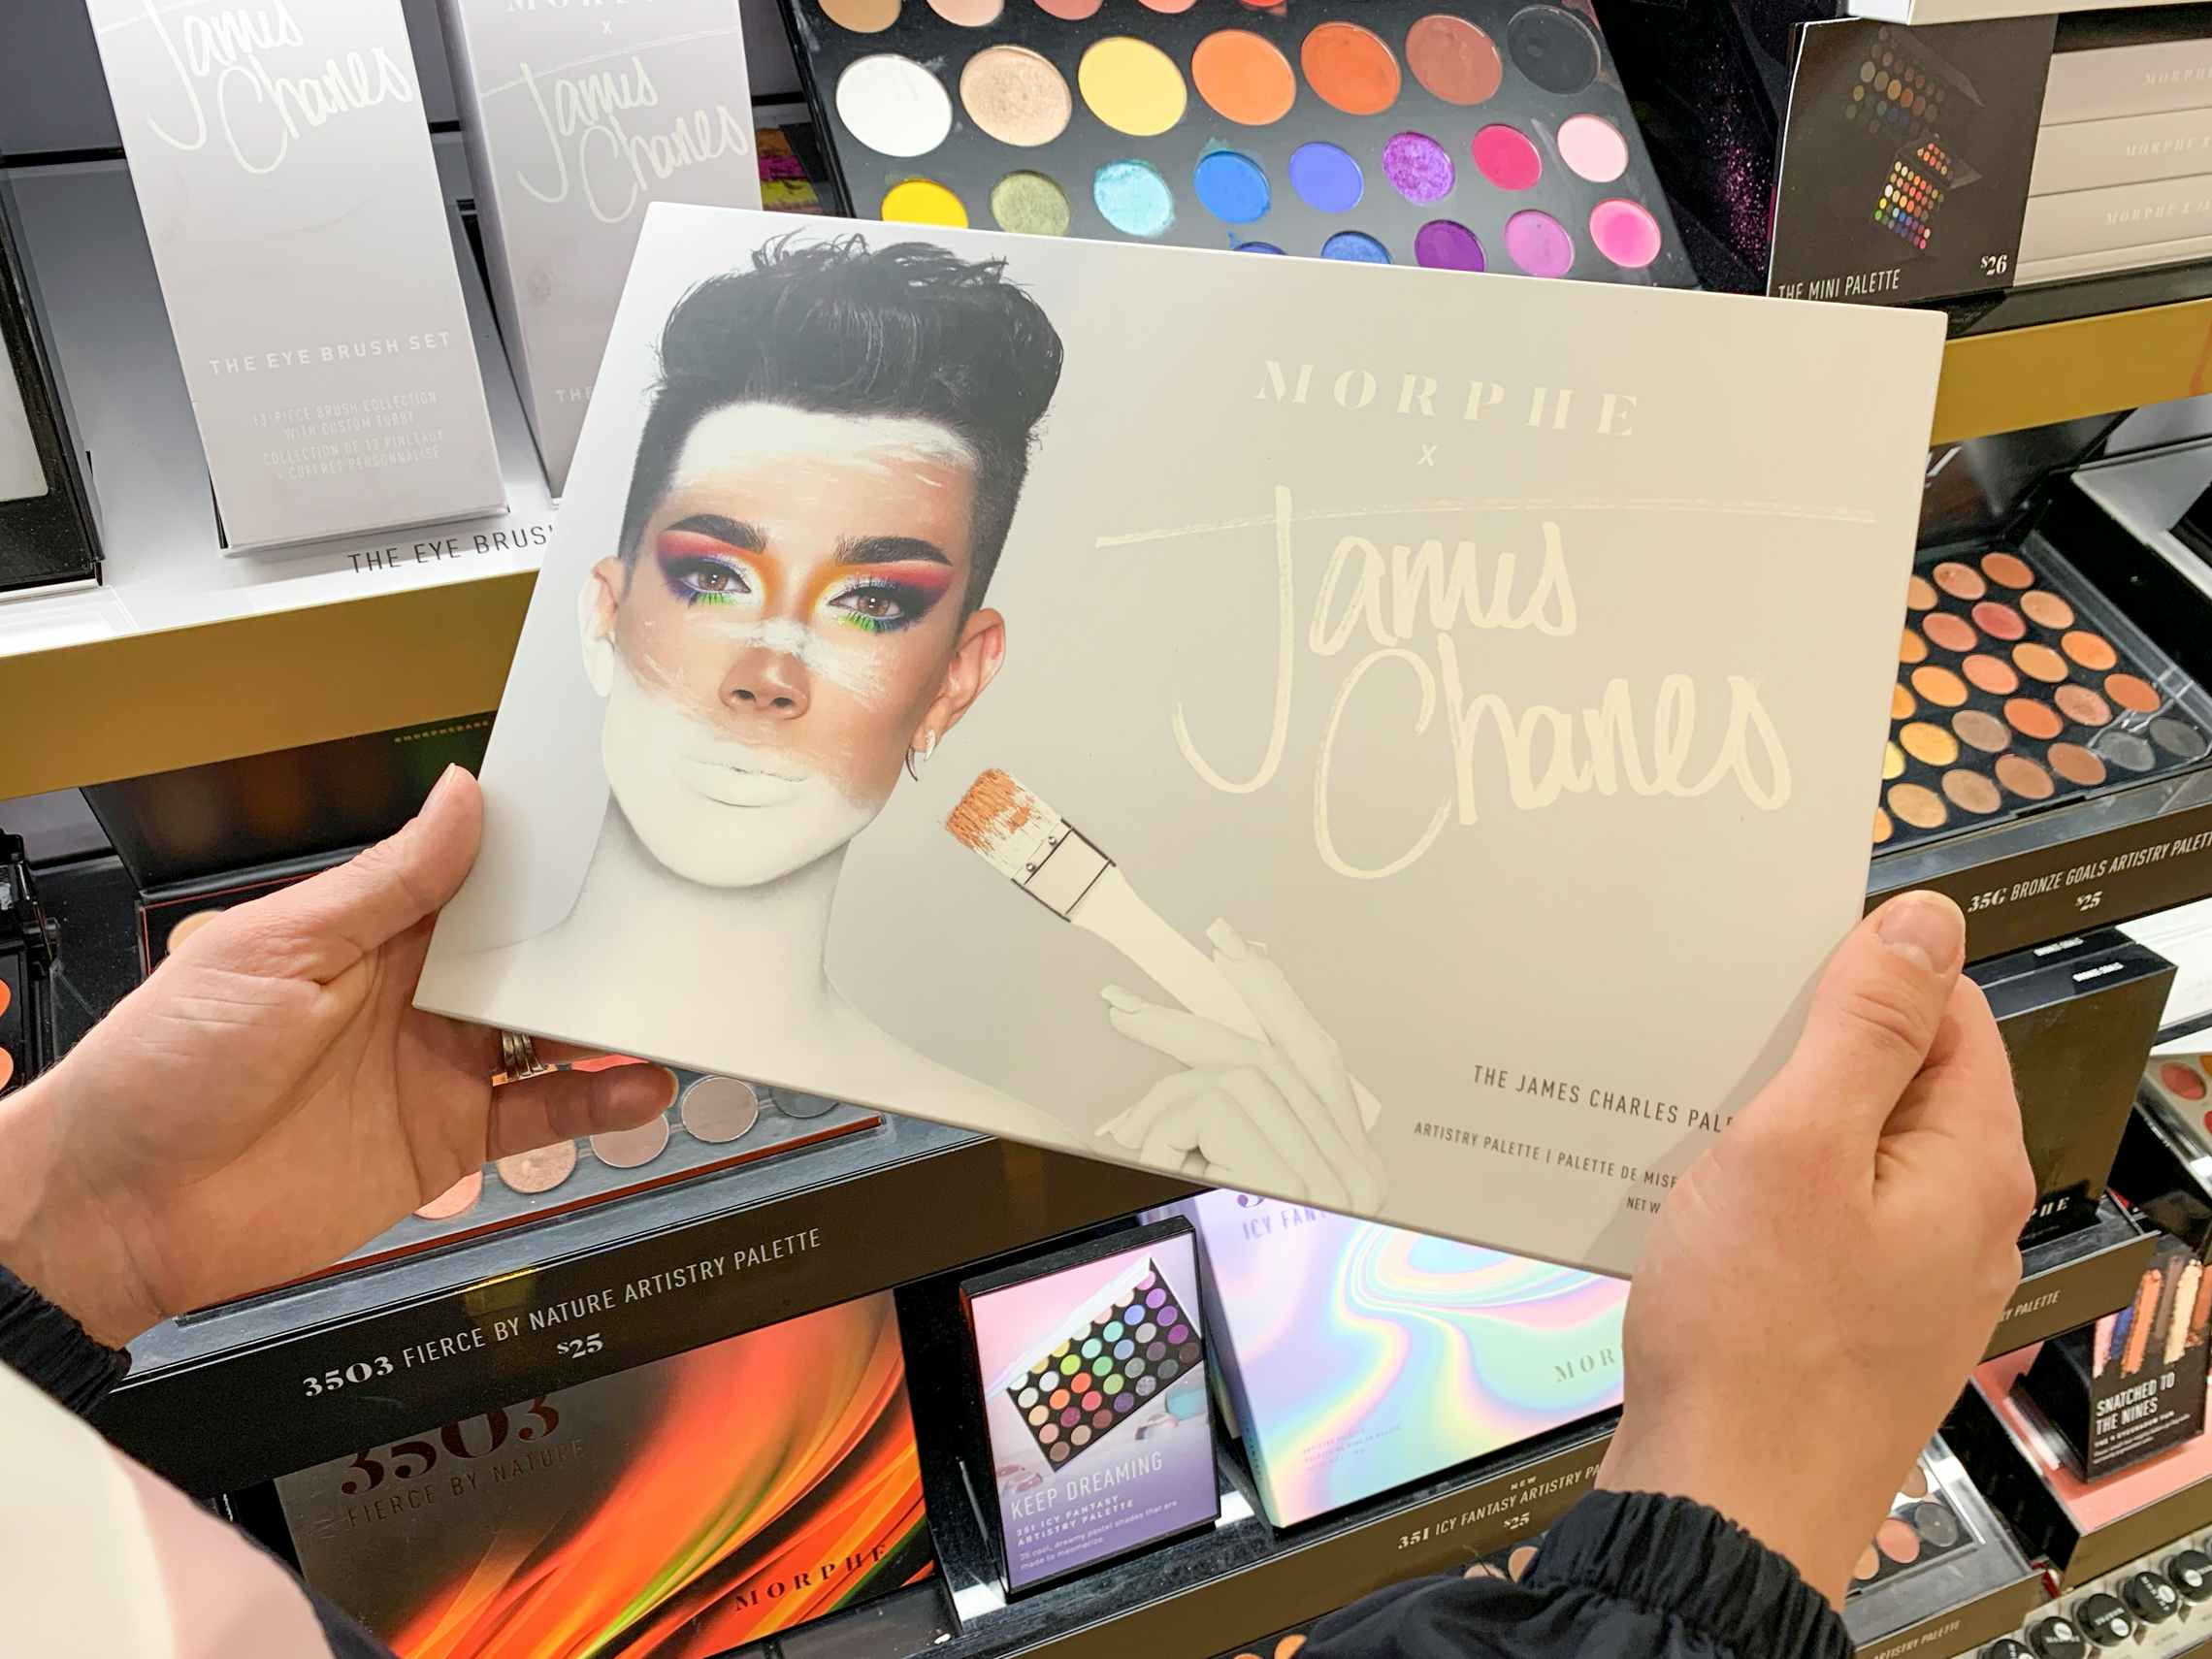 A woman looking at a Morphe James Charles makeup palette.